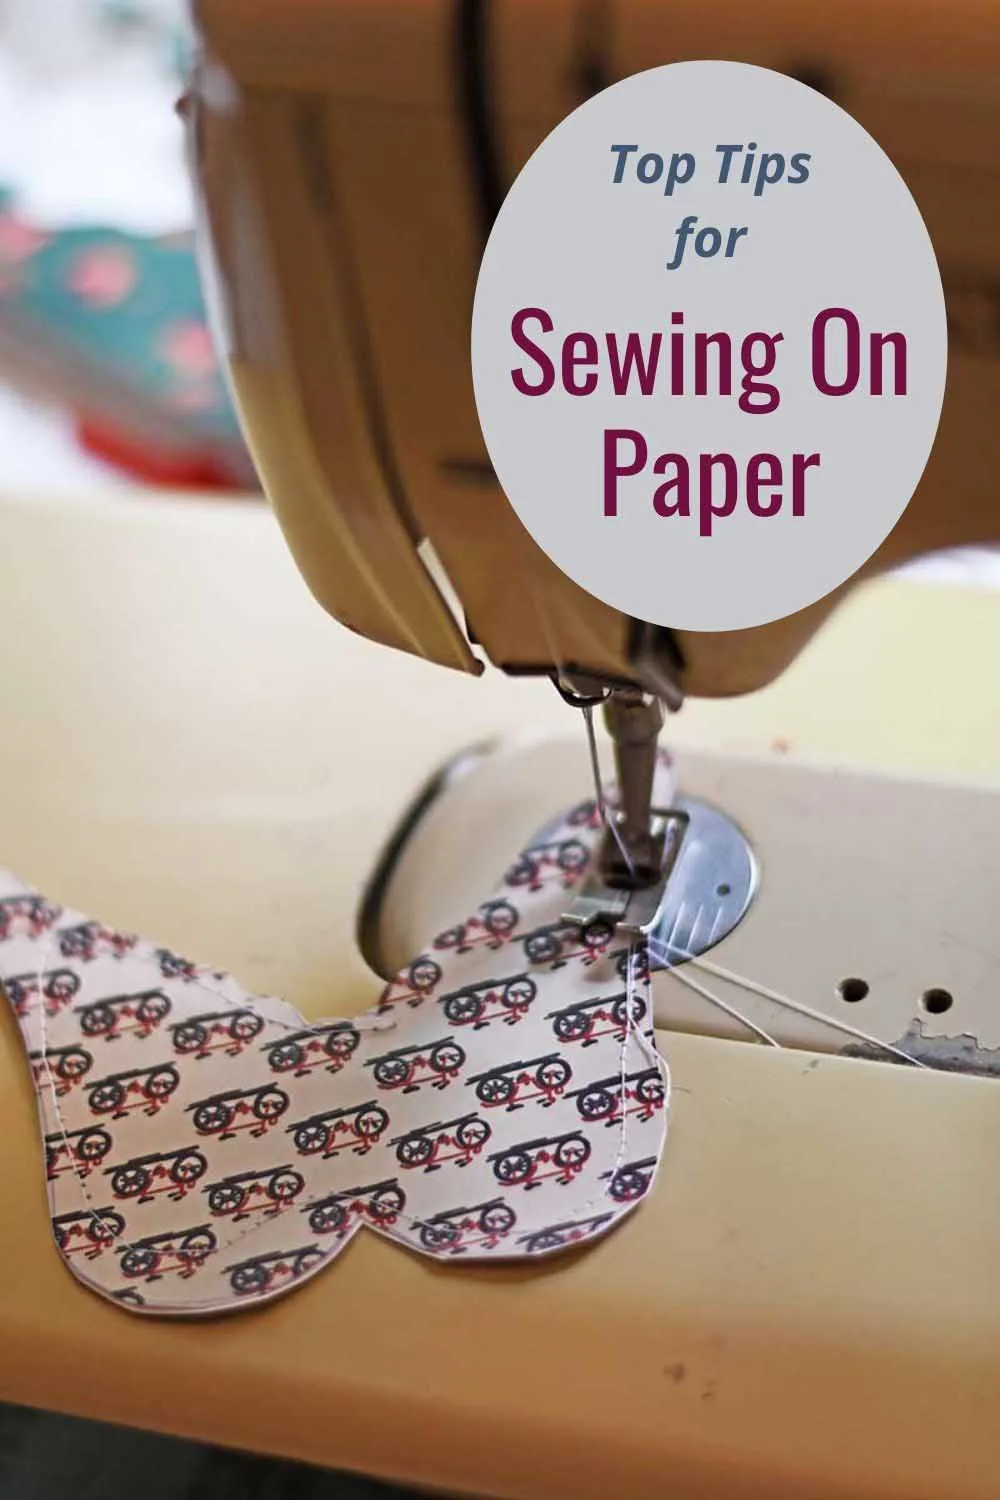 The Best Sewing On Paper Tips and Ideas - Pillar Box Blue